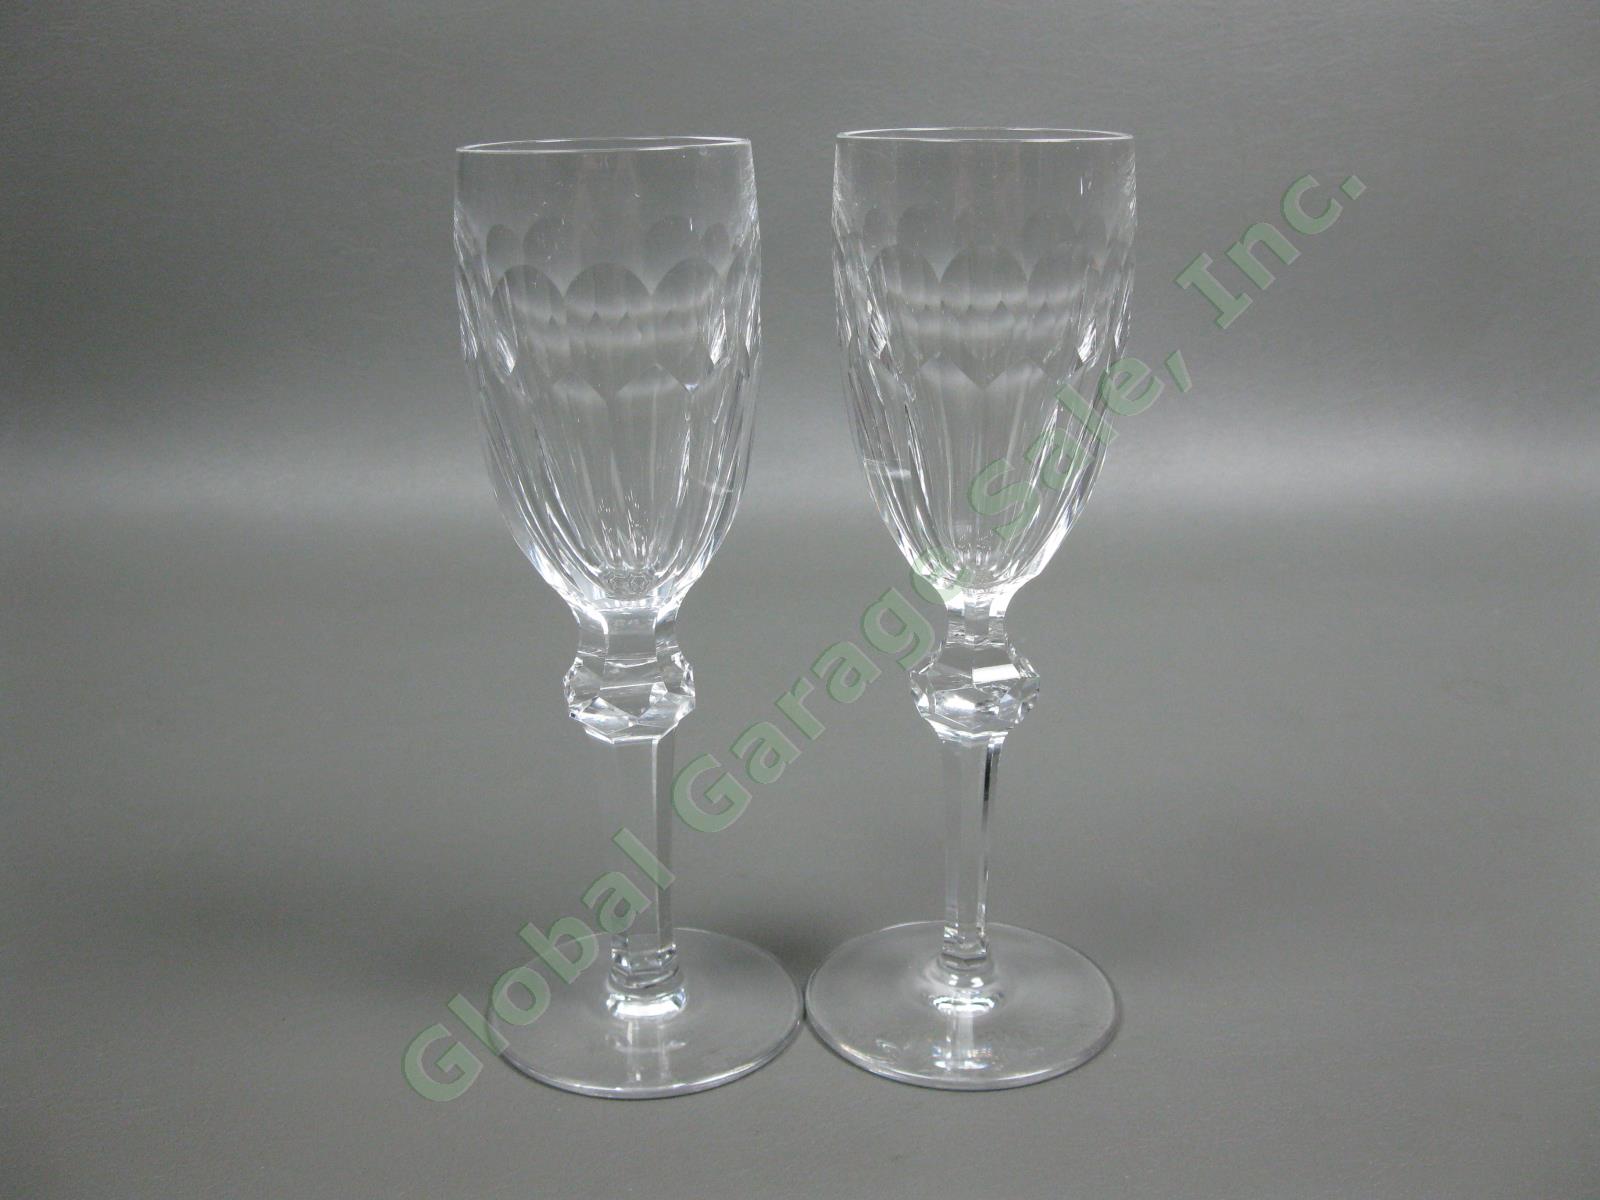 4 Waterford Crystal Curraghmore Sherry Wine Glasses Ireland Blown Cut Glass Set 2